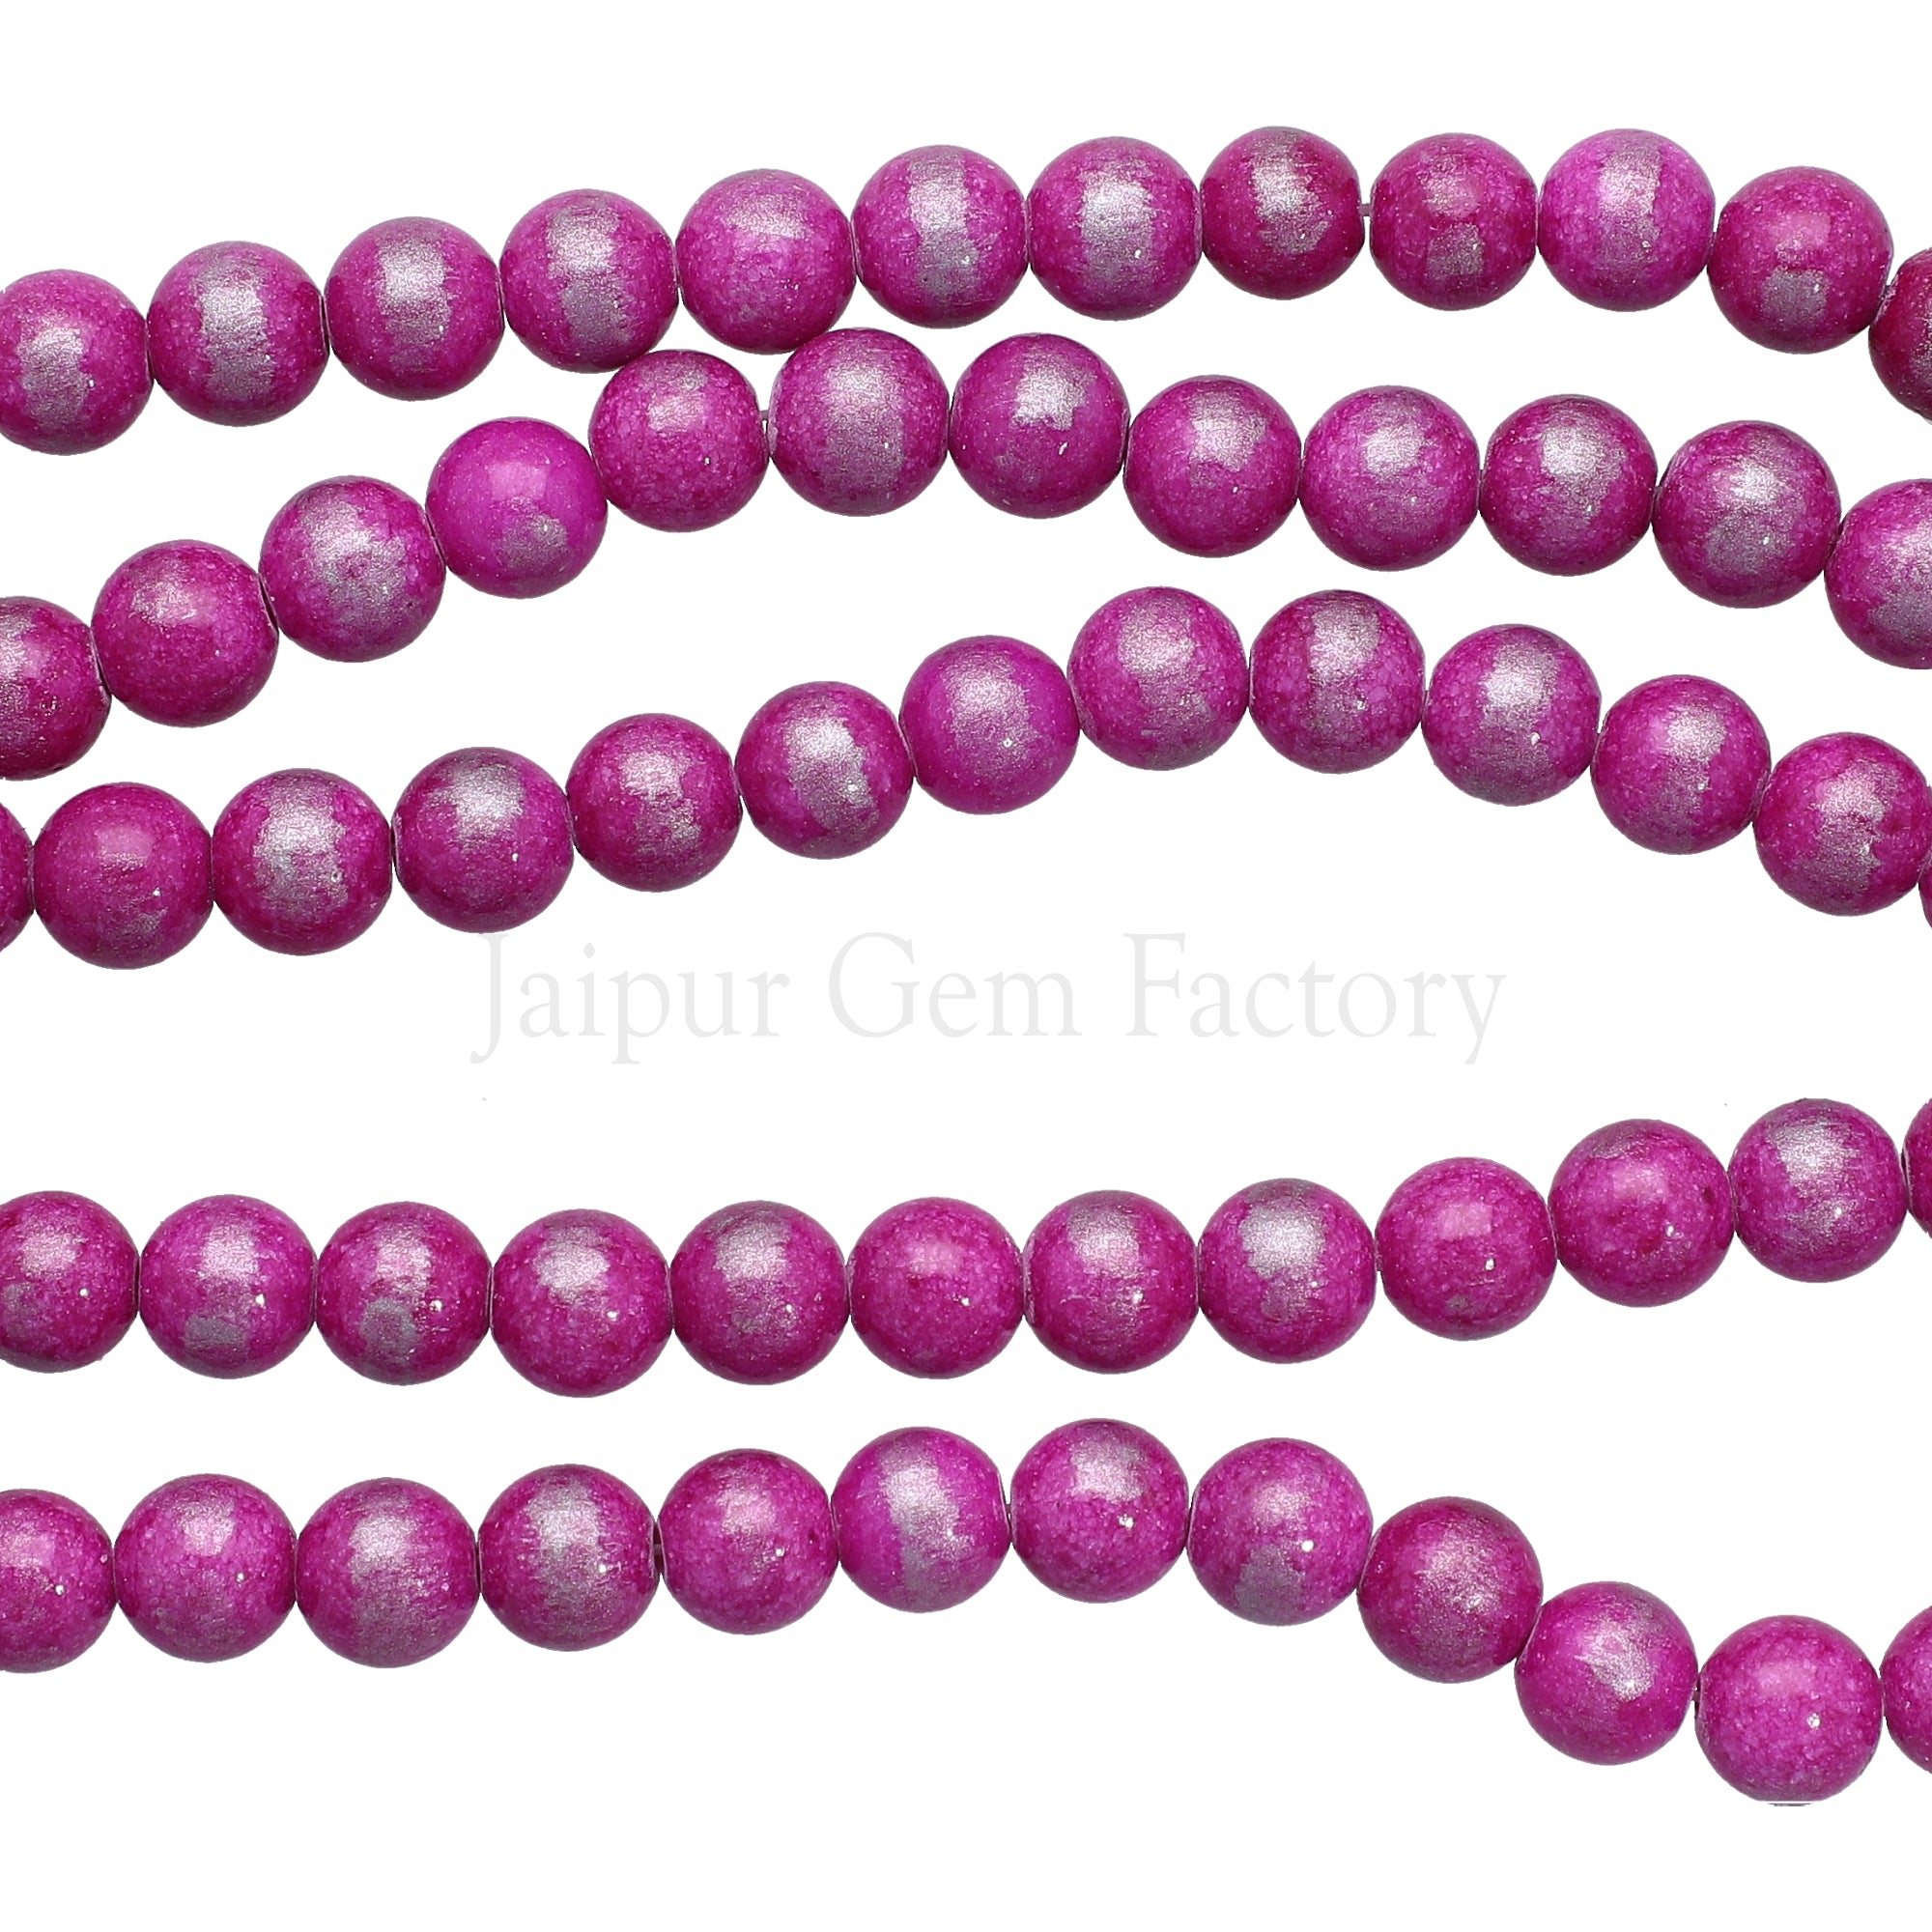 8 MM Silver Leafed Jade Smooth Round Beads 15 Inches Strand